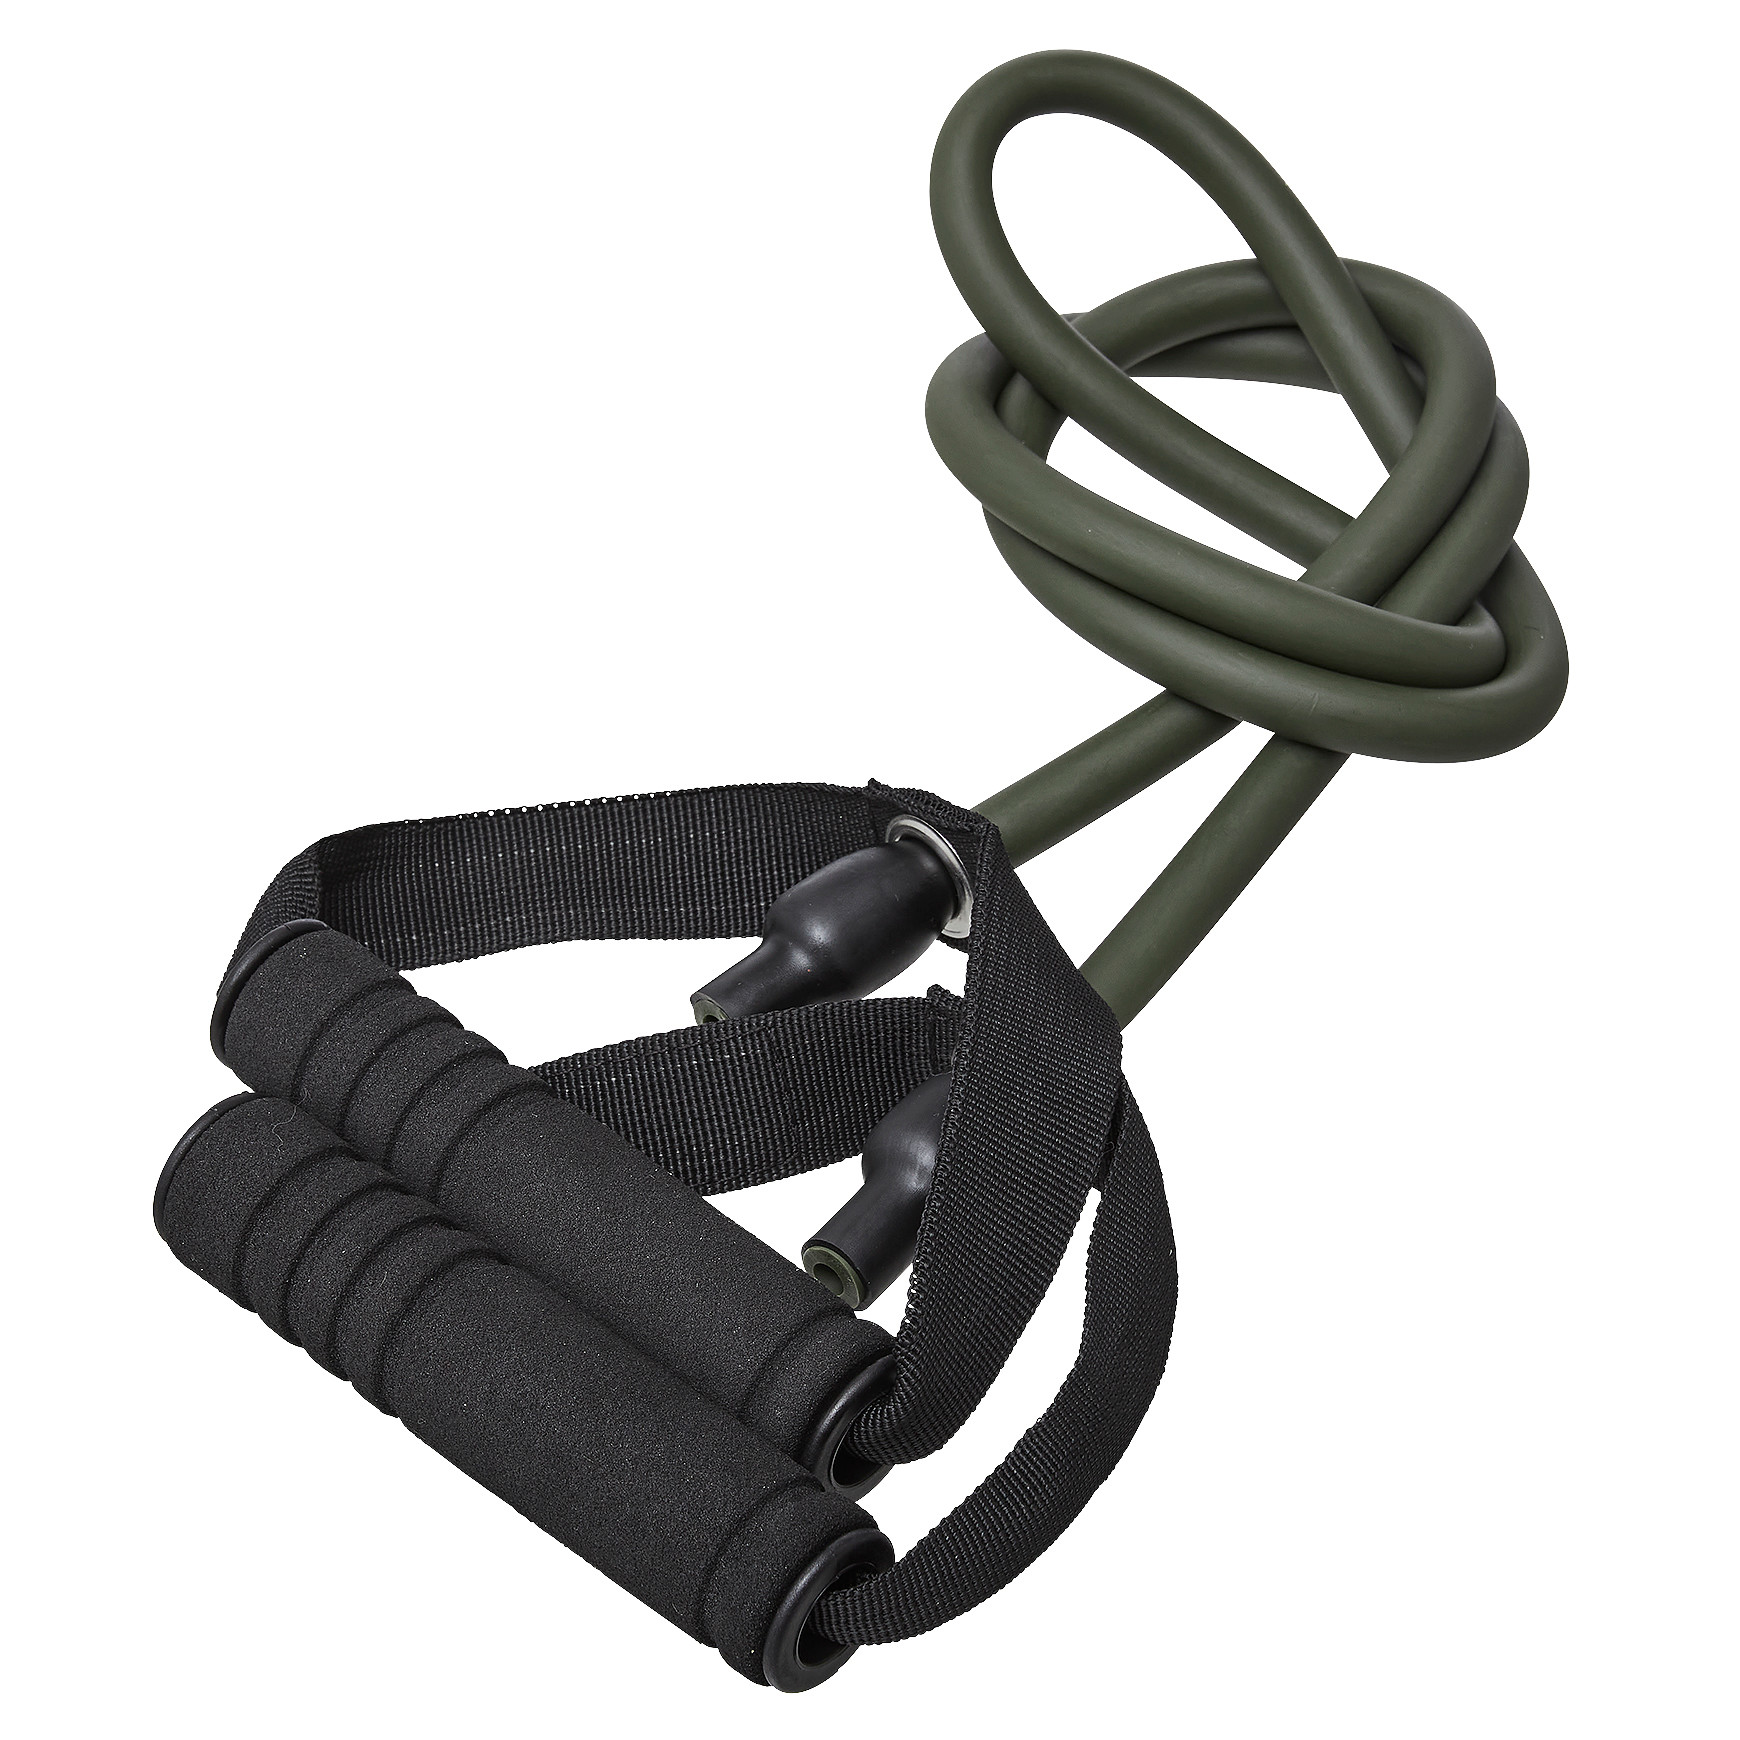 Strong rope - elastic training rope